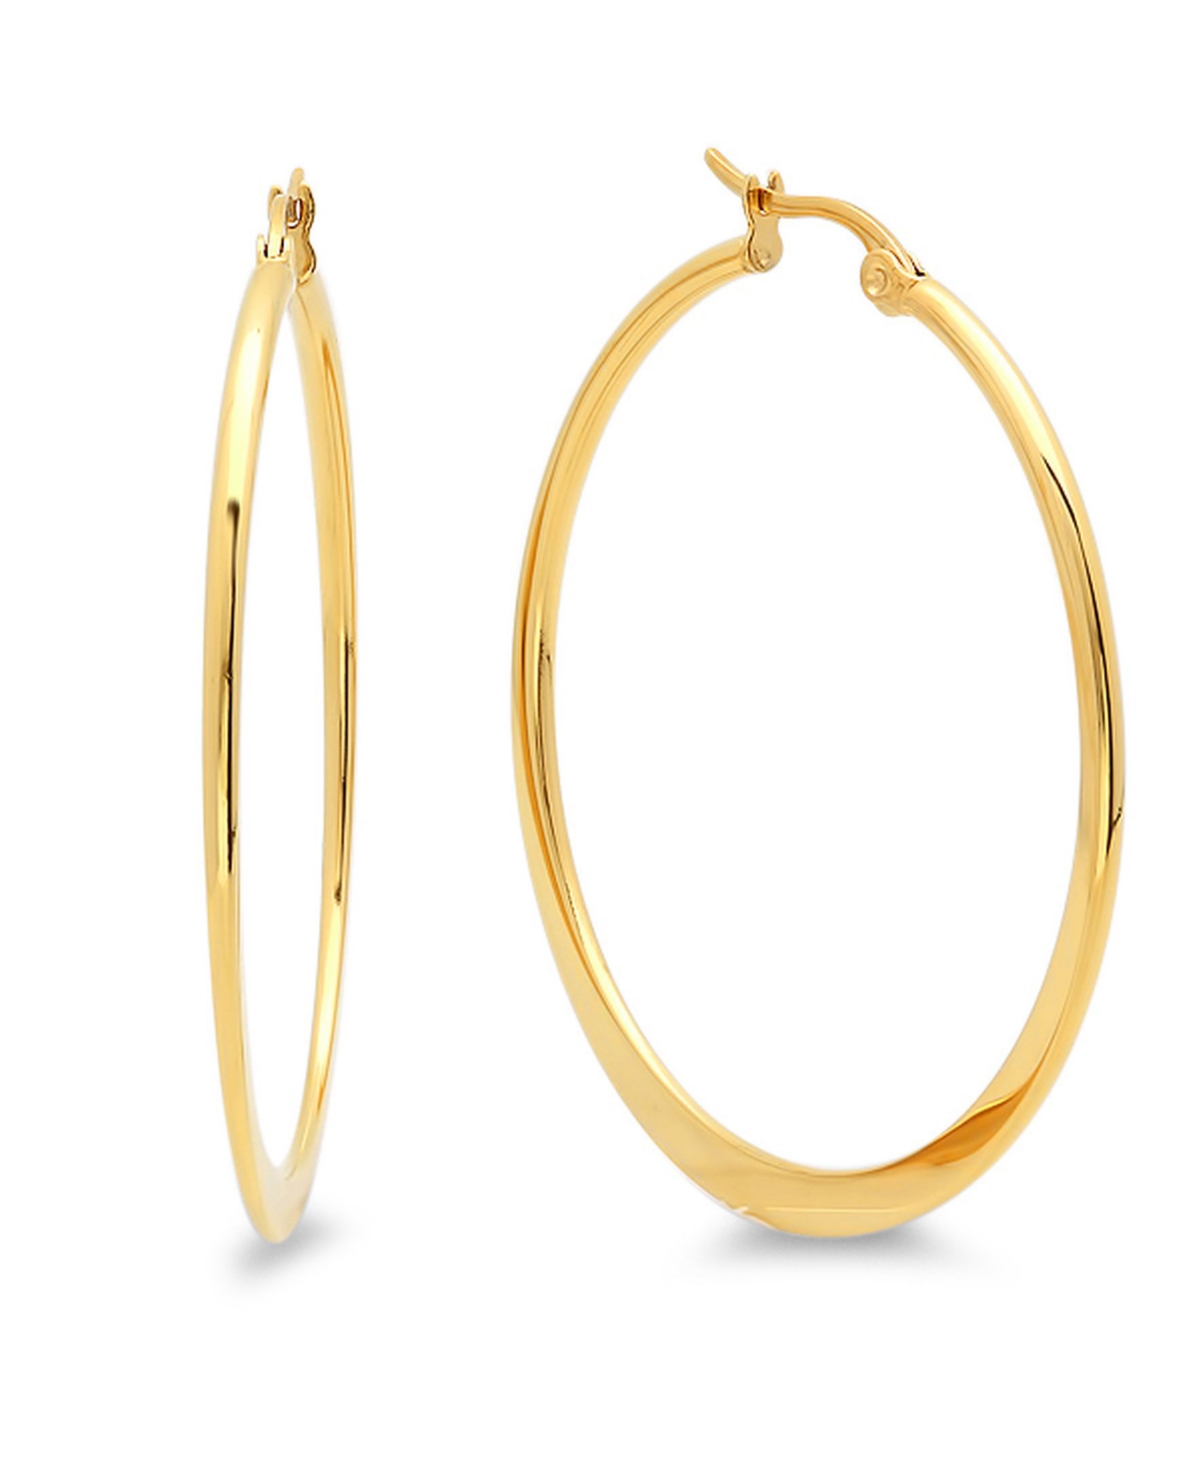 18K Gold Plated Stainless Steel Hoop Earrings - Gold-Plated